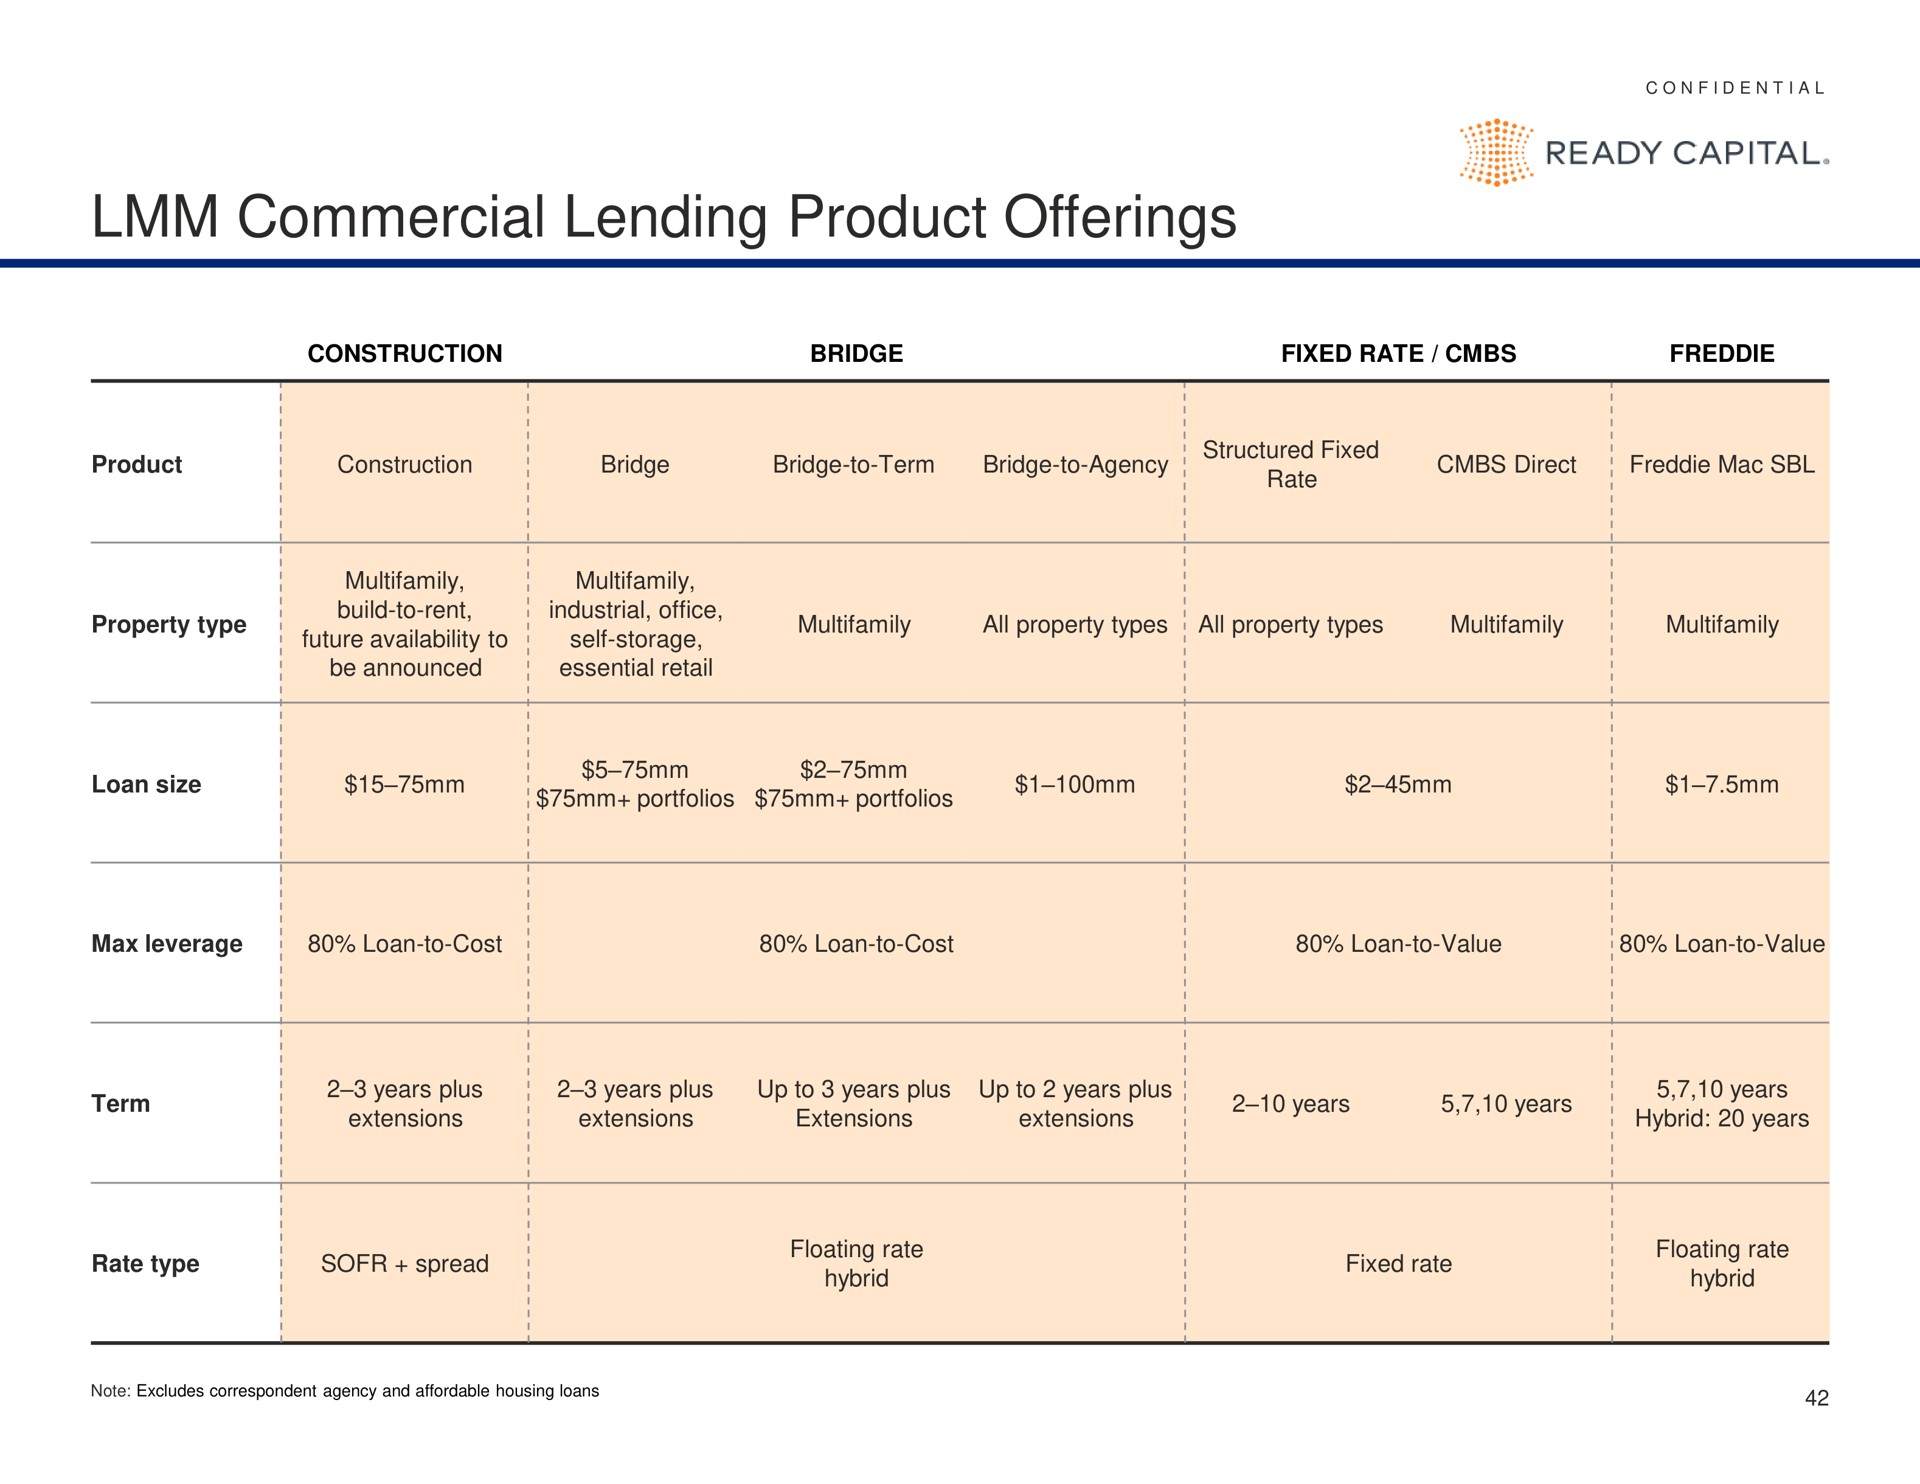 commercial lending product offerings ready capital | Ready Capital